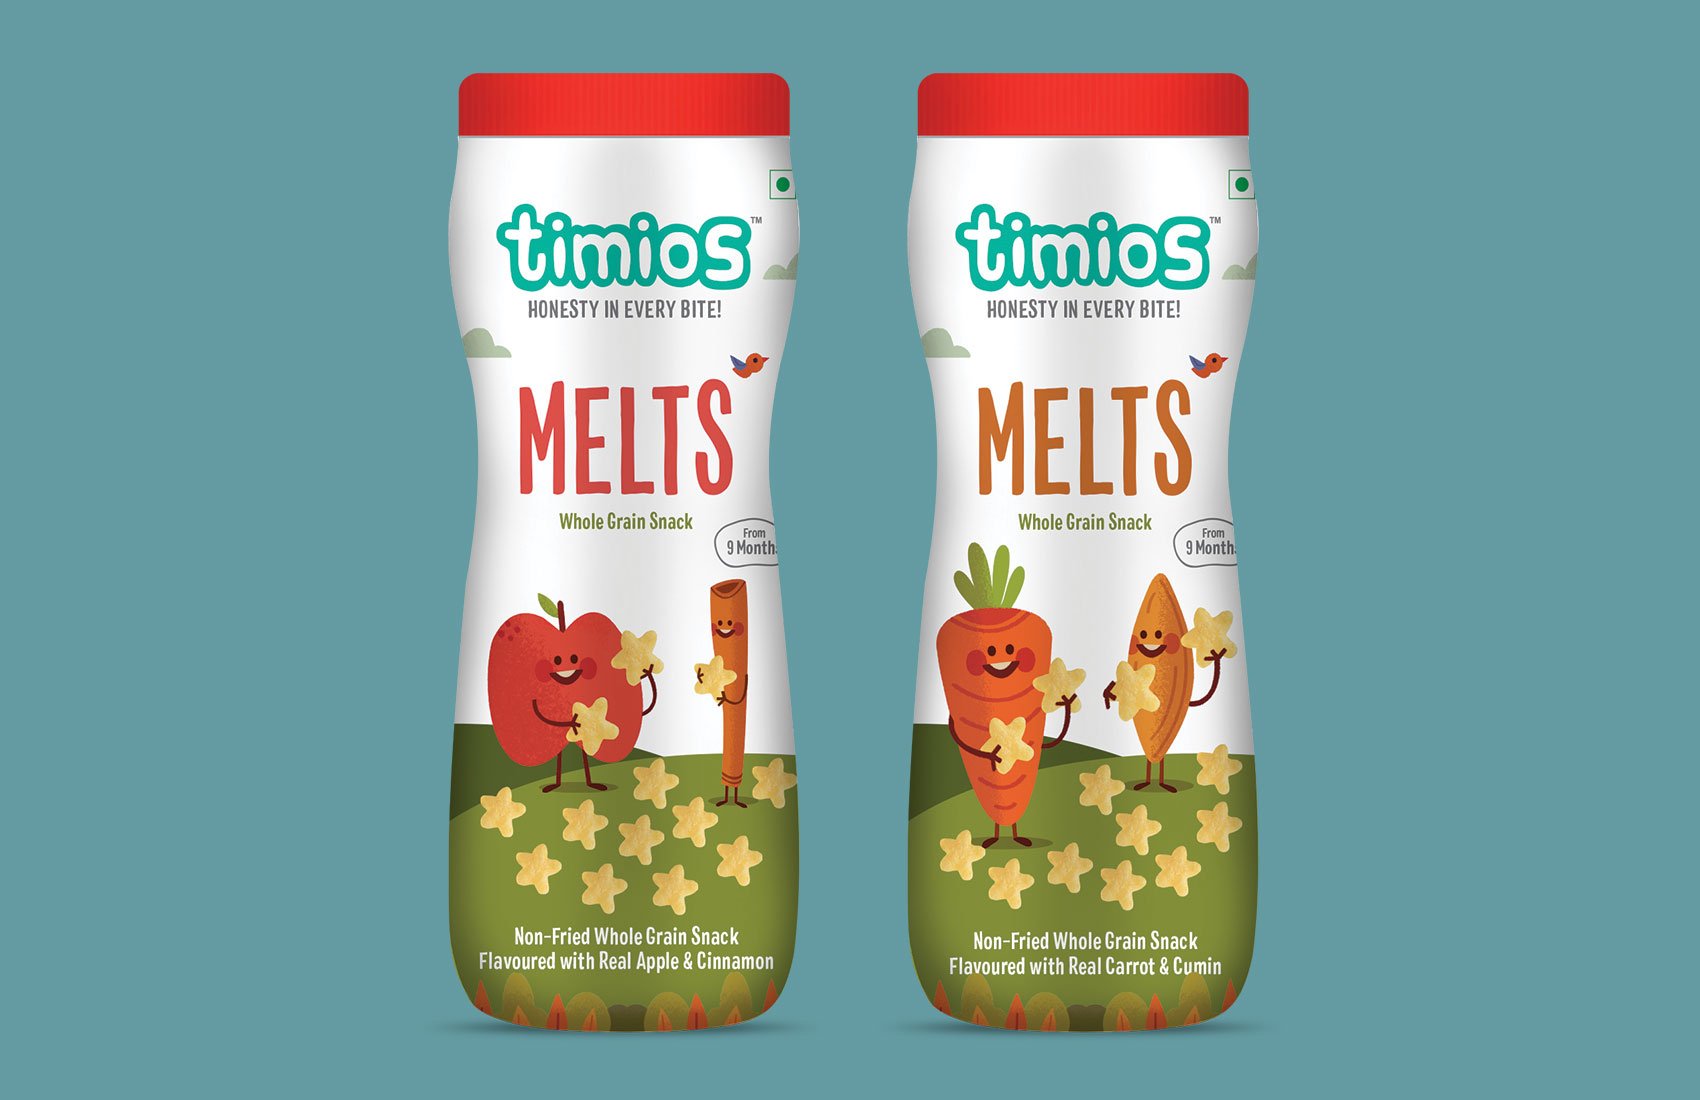 http://elebird.com/project/timios-product-packaging/